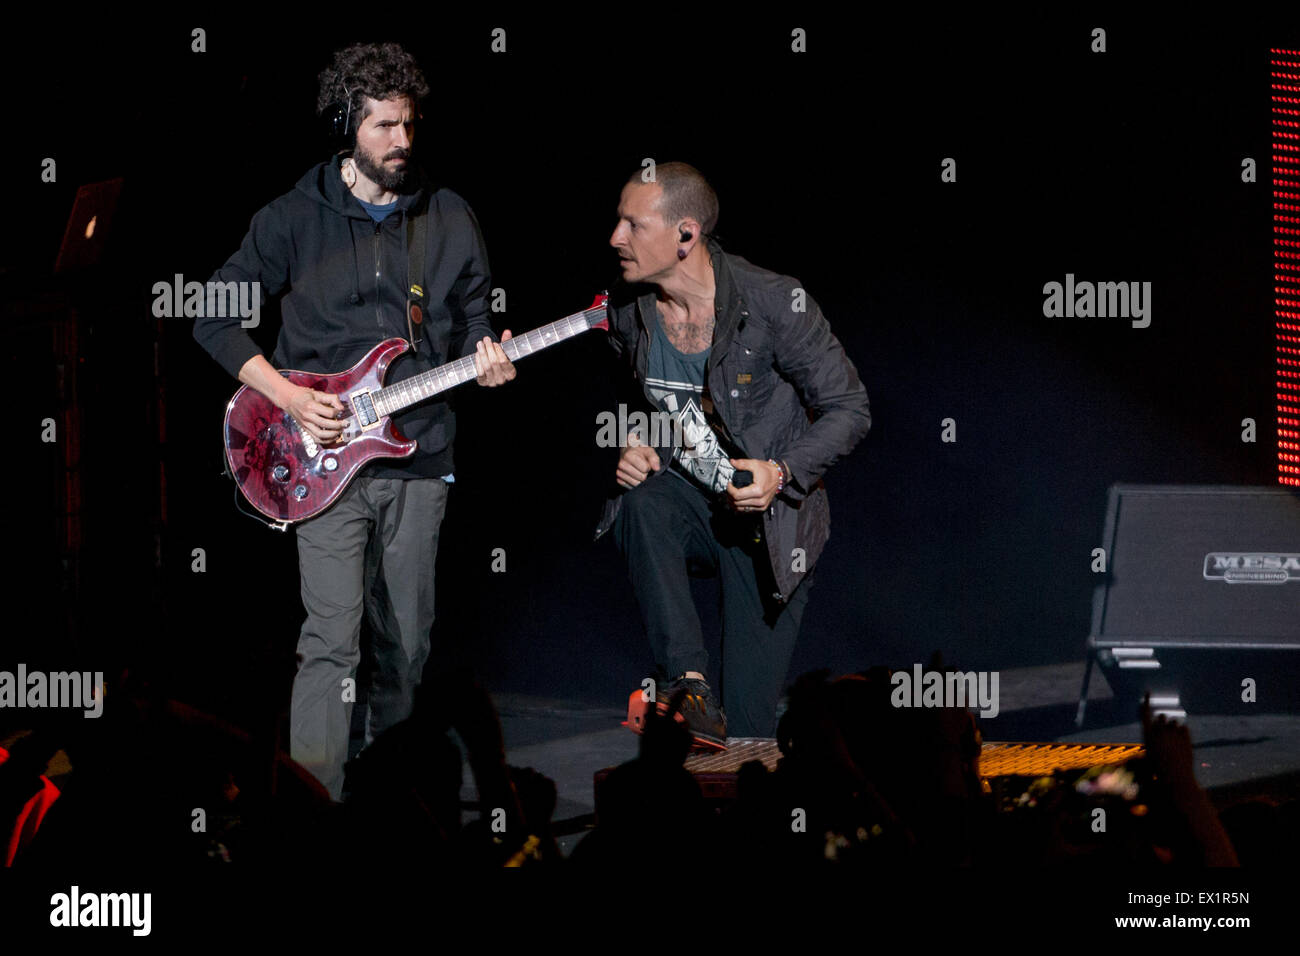 Milwaukee, Wisconsin, USA. 30th June, 2015. BRAD DELSON (L) and CHESTER BENNINGTON of Linkin Park perform live on stage at the Summerfest Music Festival in Milwaukee, Wisconsin © Daniel DeSlover/ZUMA Wire/Alamy Live News Stock Photo